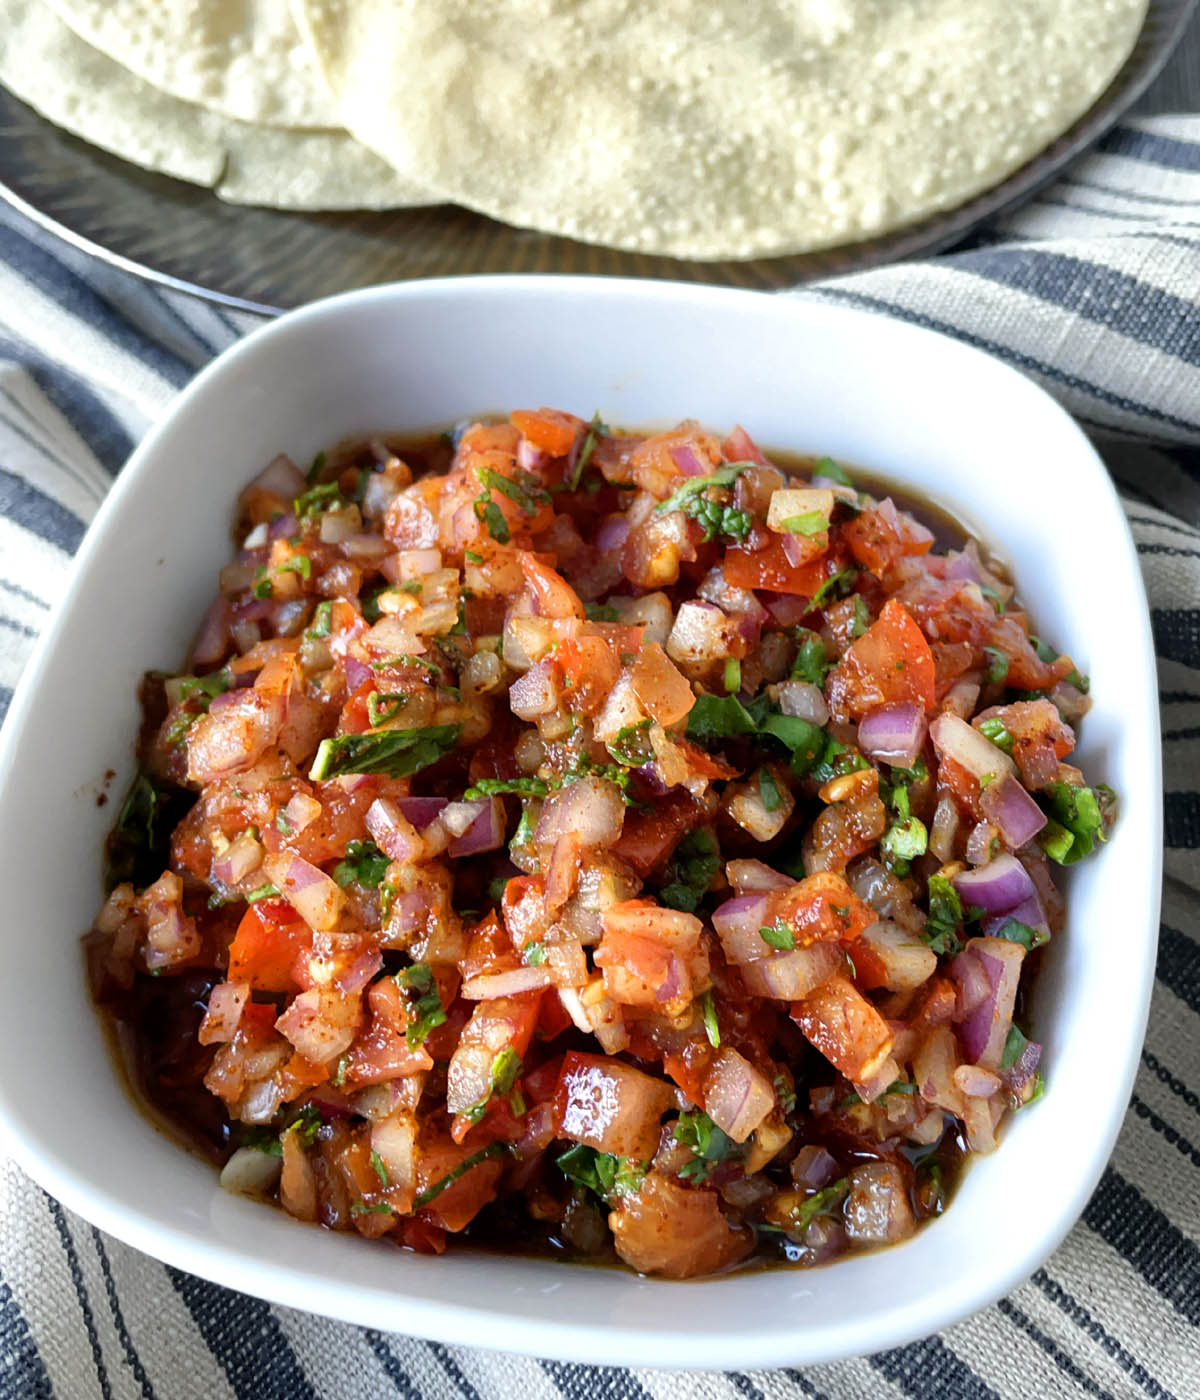 A white square dish containing finely diced red tomatoes, red onions, and chopped green herbs.